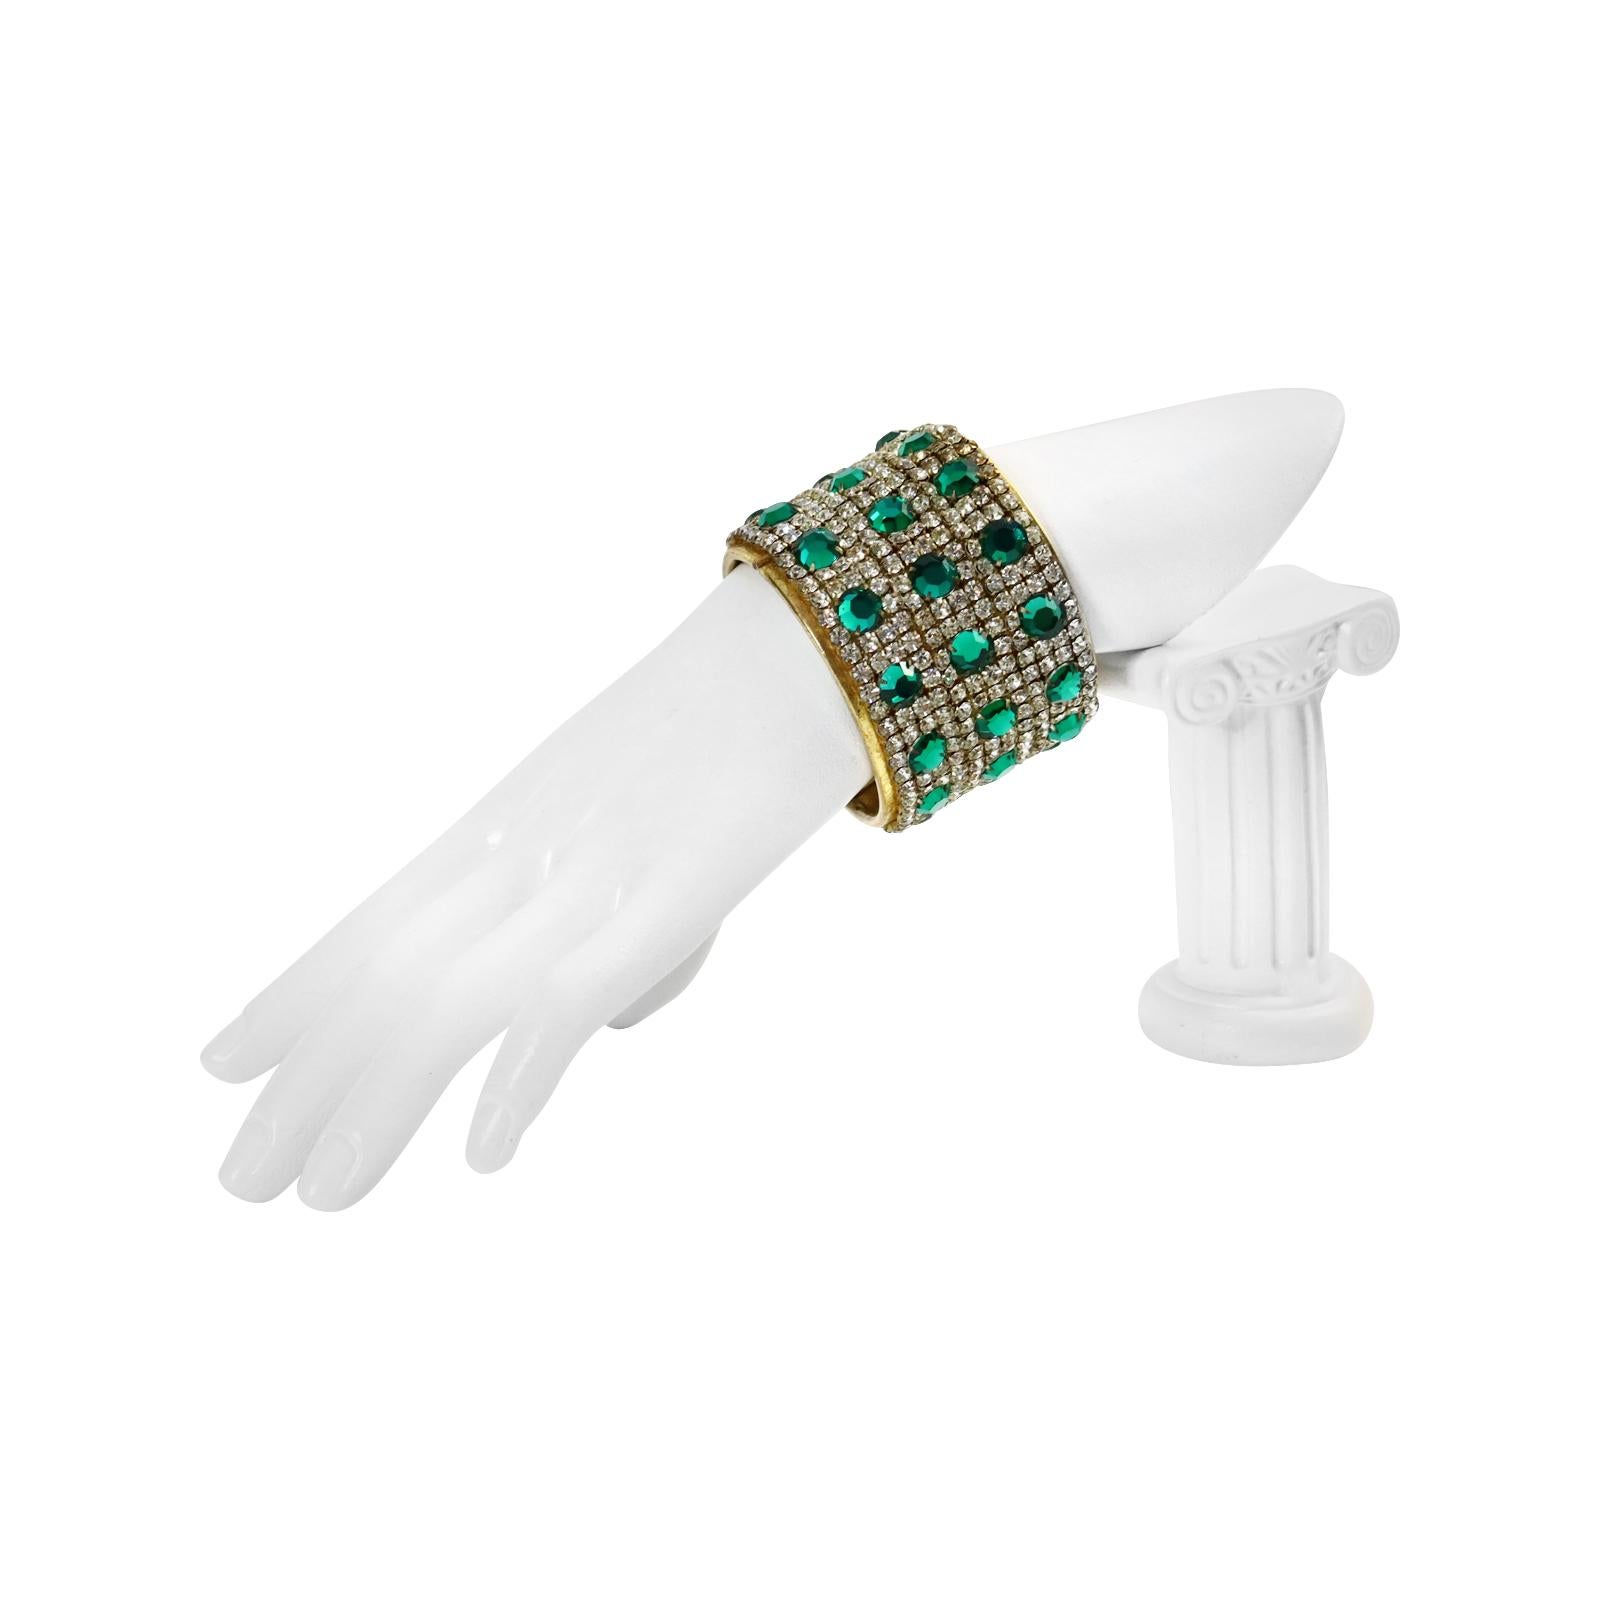 Vintage Miriam Haskell Gold Tone Diamante and Emerald Green  Bracelet Circ 1950s. This beauty is in such great shape for its age. Rows of clear crystals with large emerald green crystals on a decorated gold bracelet. Very special. 
The most gorgeous